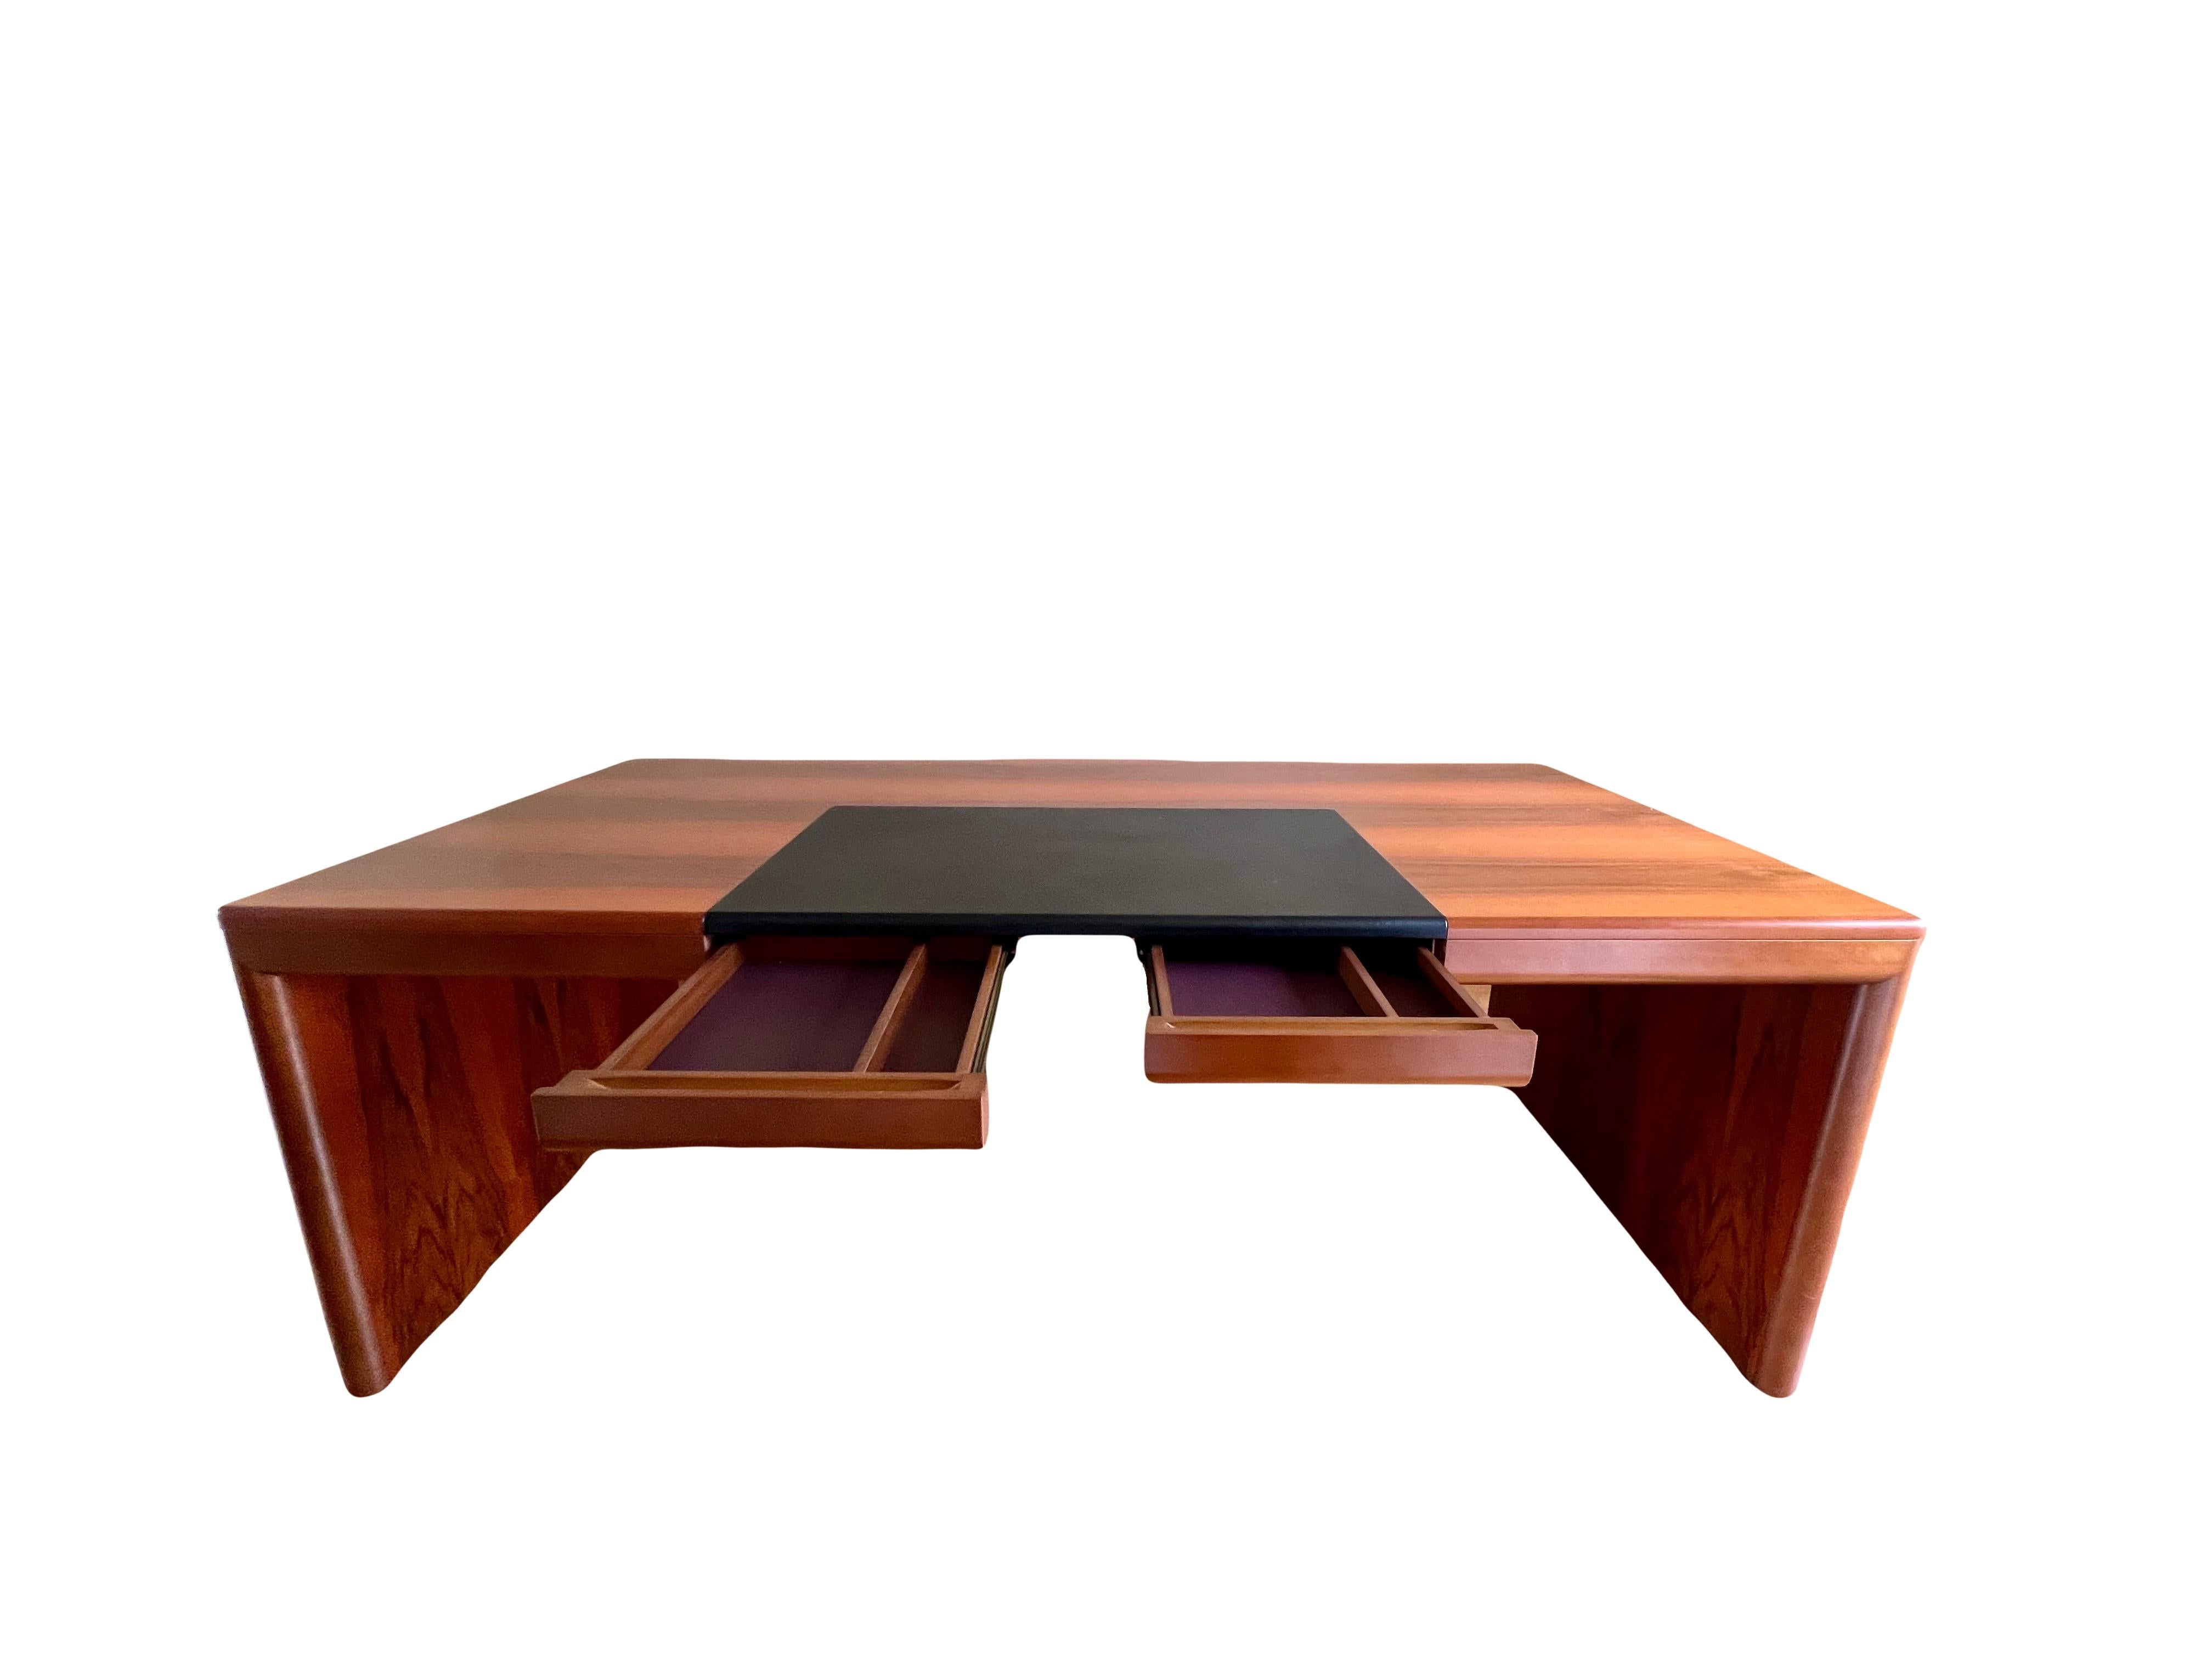 Italian Direction's Desk by Roberto Danesi for Maison Frezza

Indulge in luxury and refinement with this exceptional desk set designed by the renowned Italian designer Roberto Danesi for the prestigious Maison Frezza. Infused with Danesi's